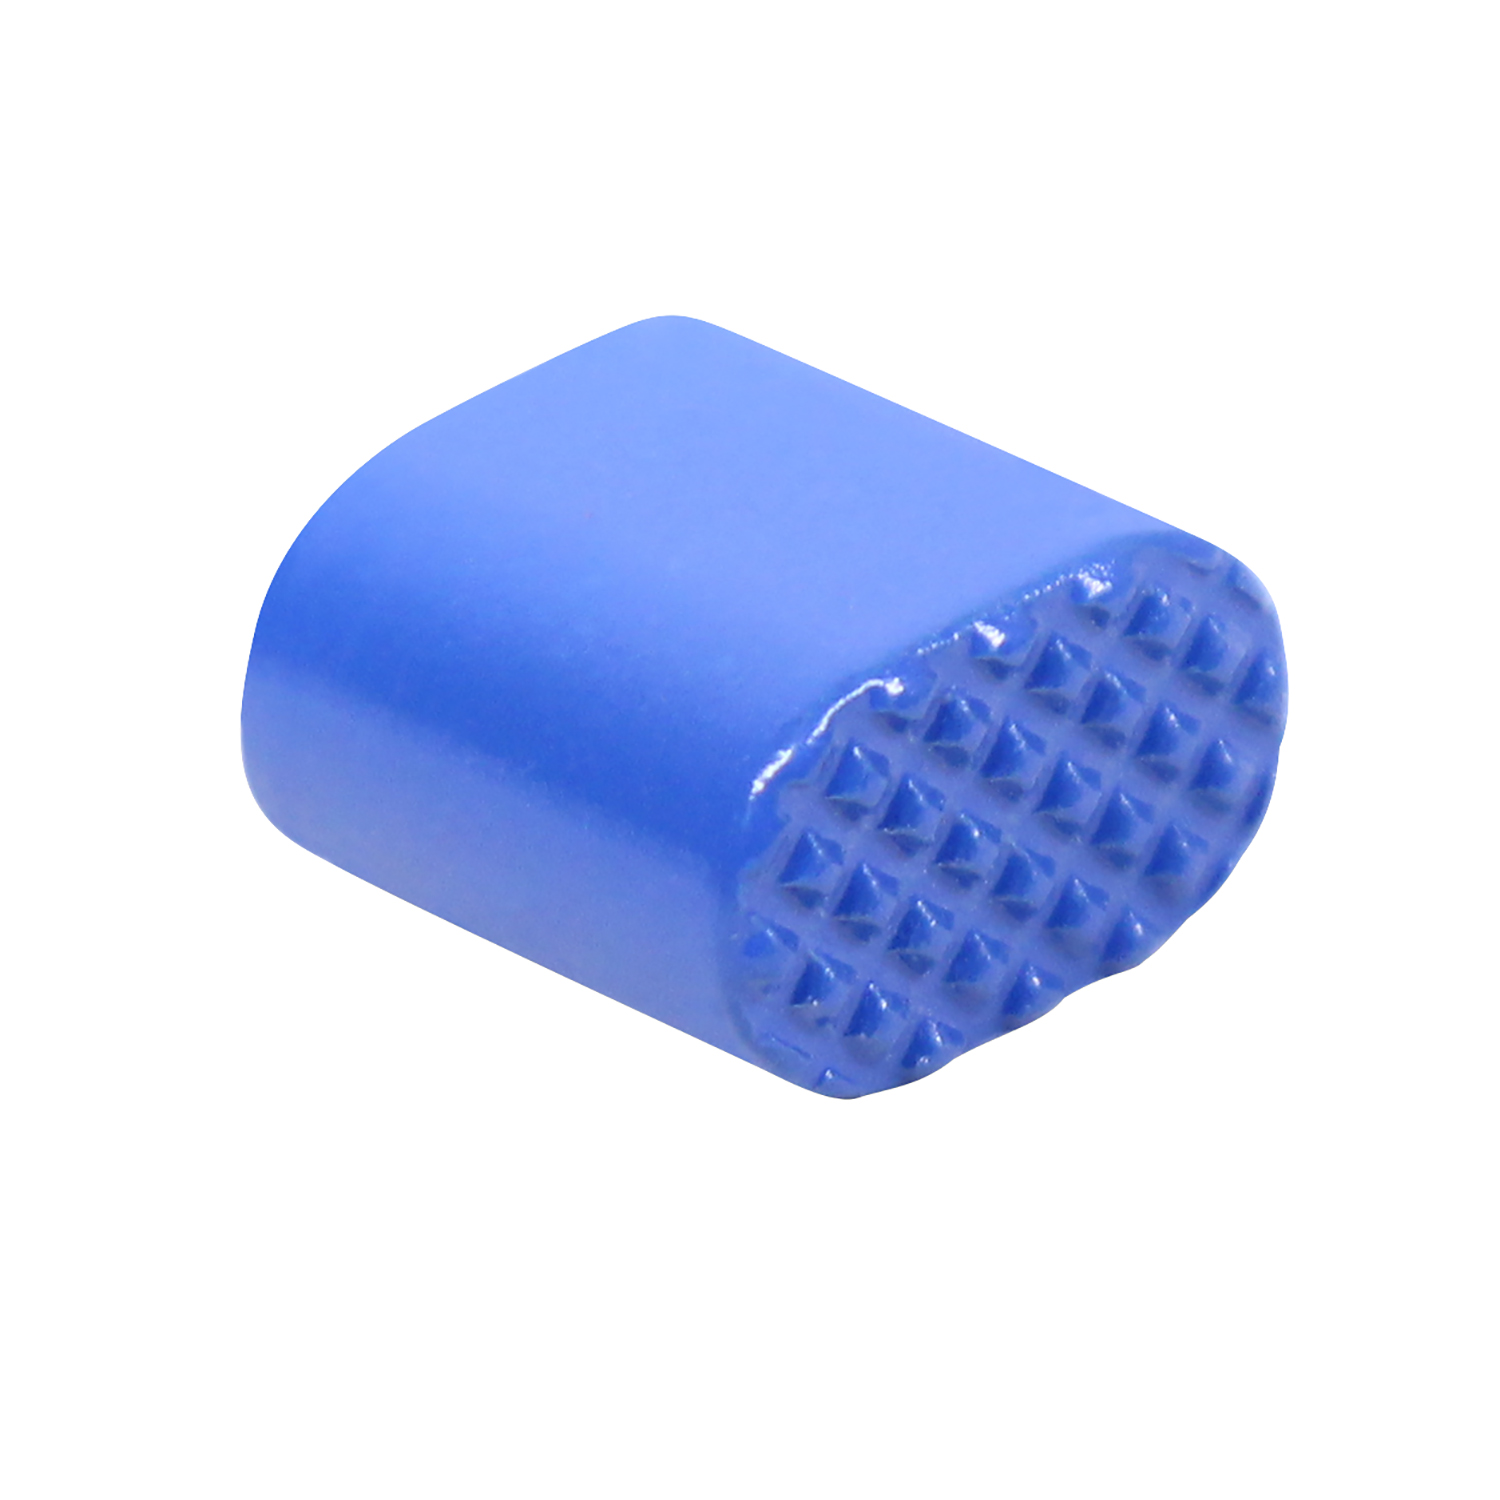 A cornflower blue rubber cap for buttons with a diamond grid texture